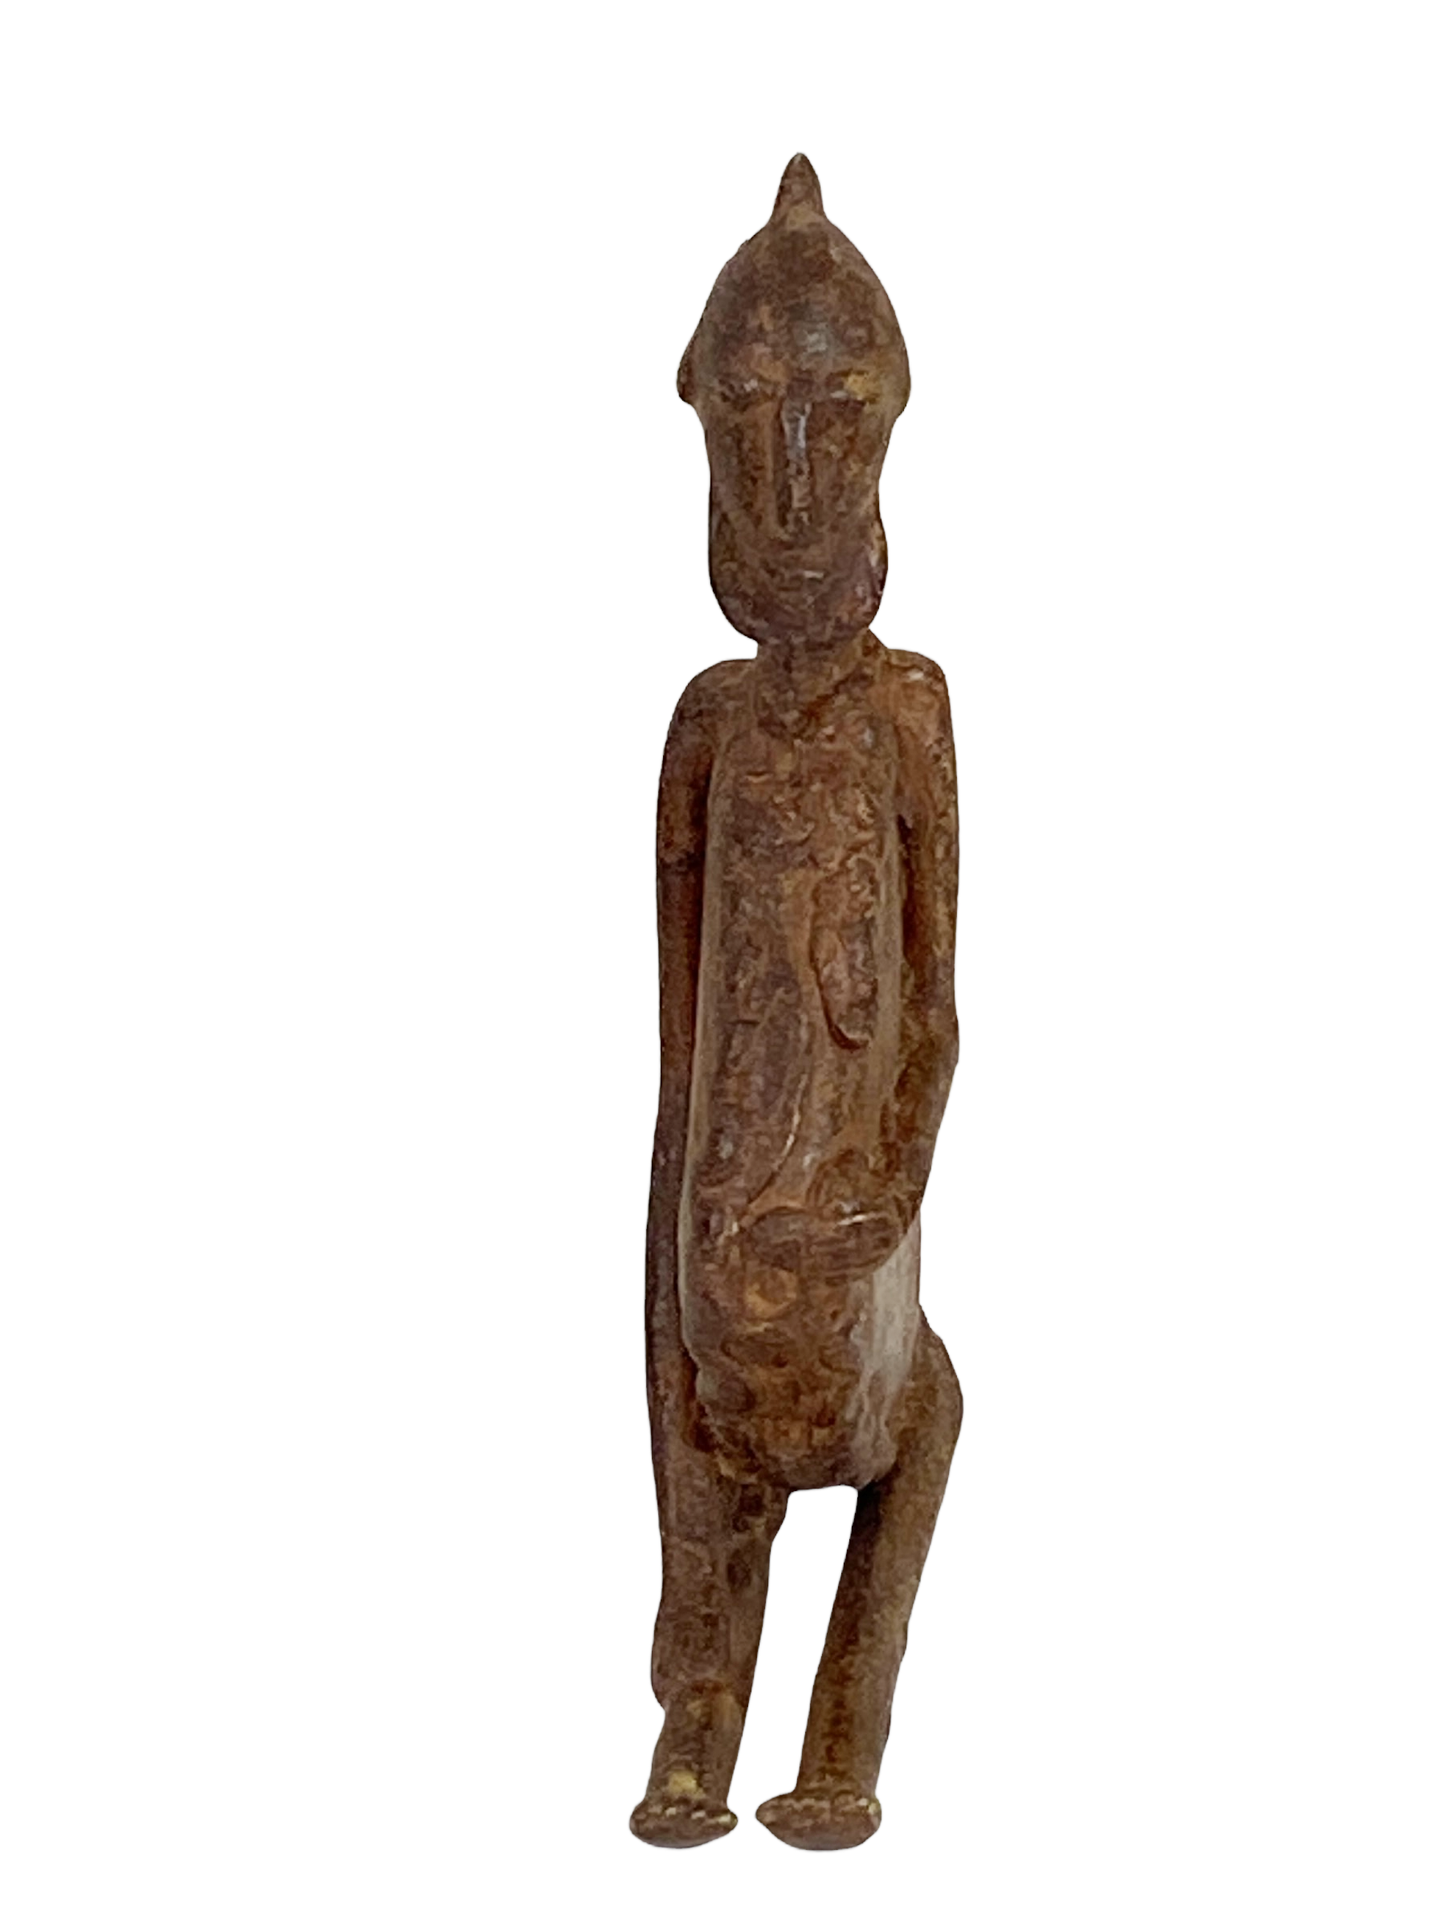 # 4814 African Old Dogon Bronze Figure of a Seating Male Mali 5" h